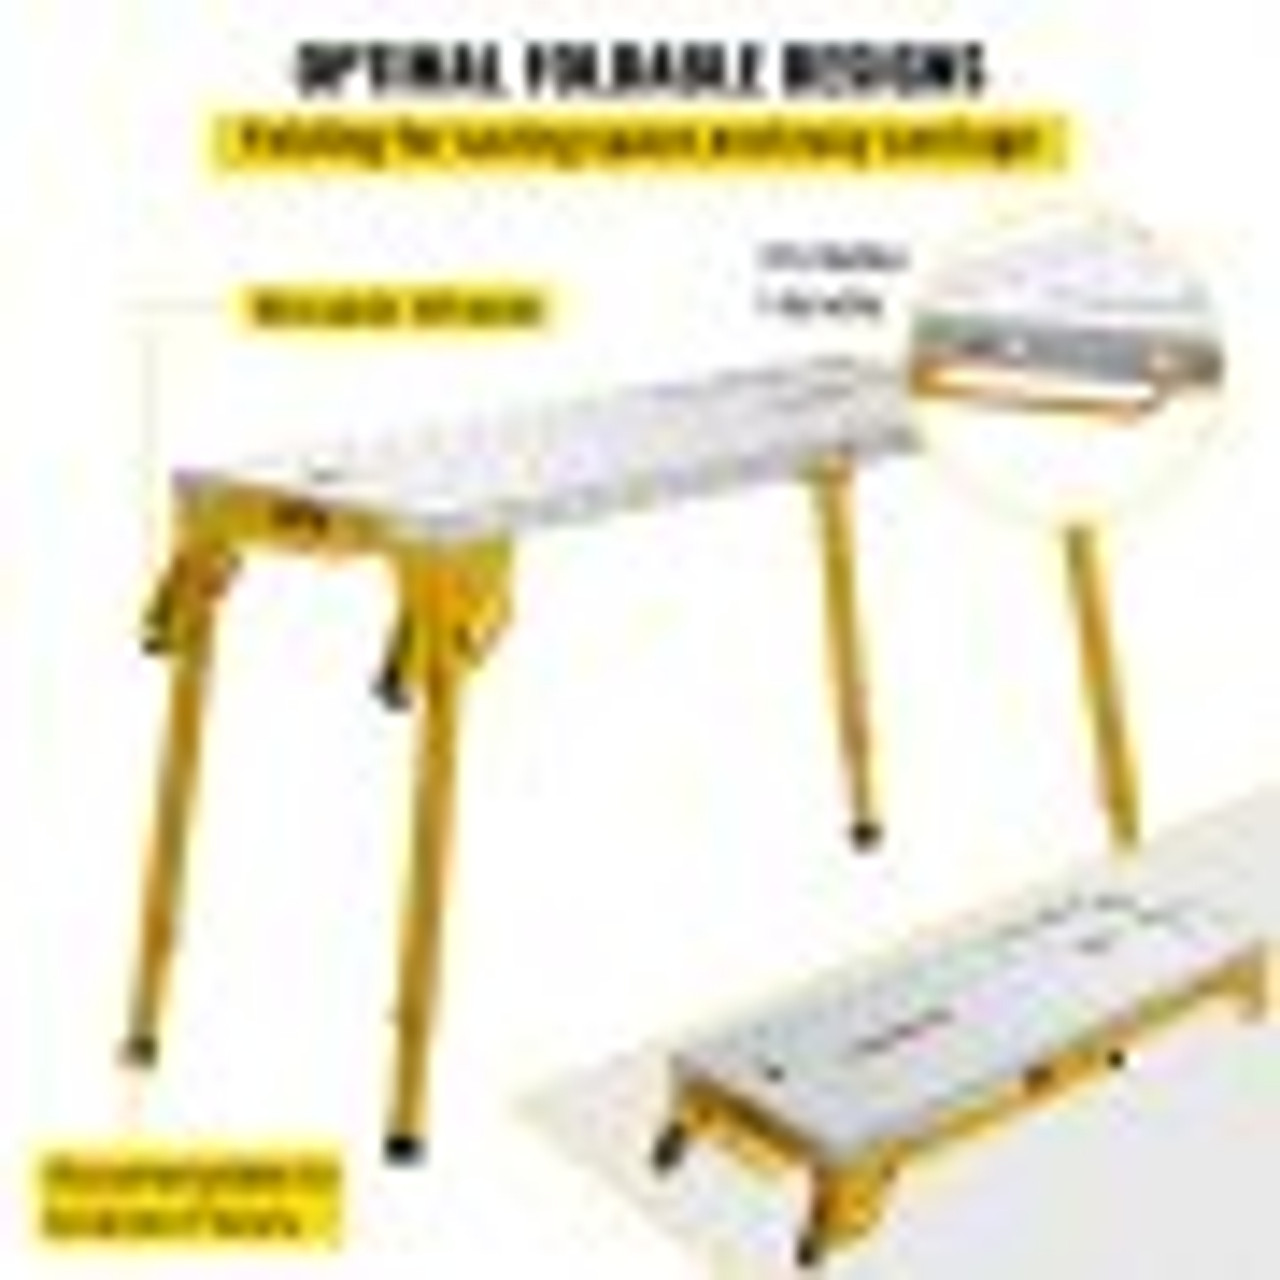 Welding Table, 46" x 18" Table Top, Steel Portable Workbench with 1000lb Weight Capacity, 4 Adjustable Height Work Table w/ Folding Legs, Carrying Handle and 2 Casters